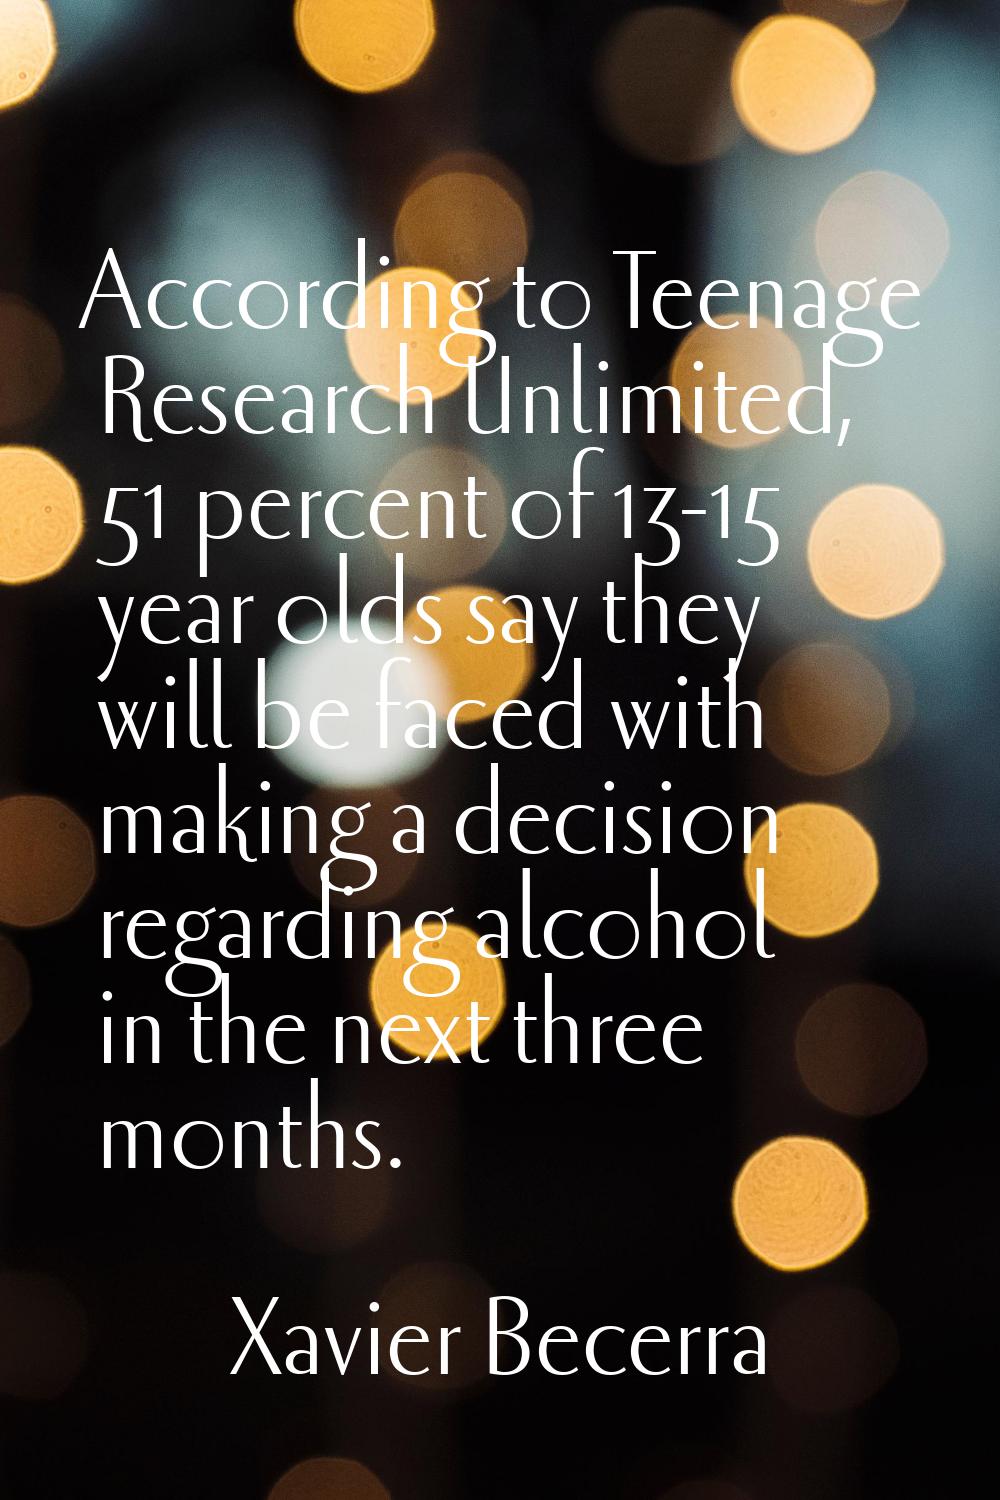 According to Teenage Research Unlimited, 51 percent of 13-15 year olds say they will be faced with 